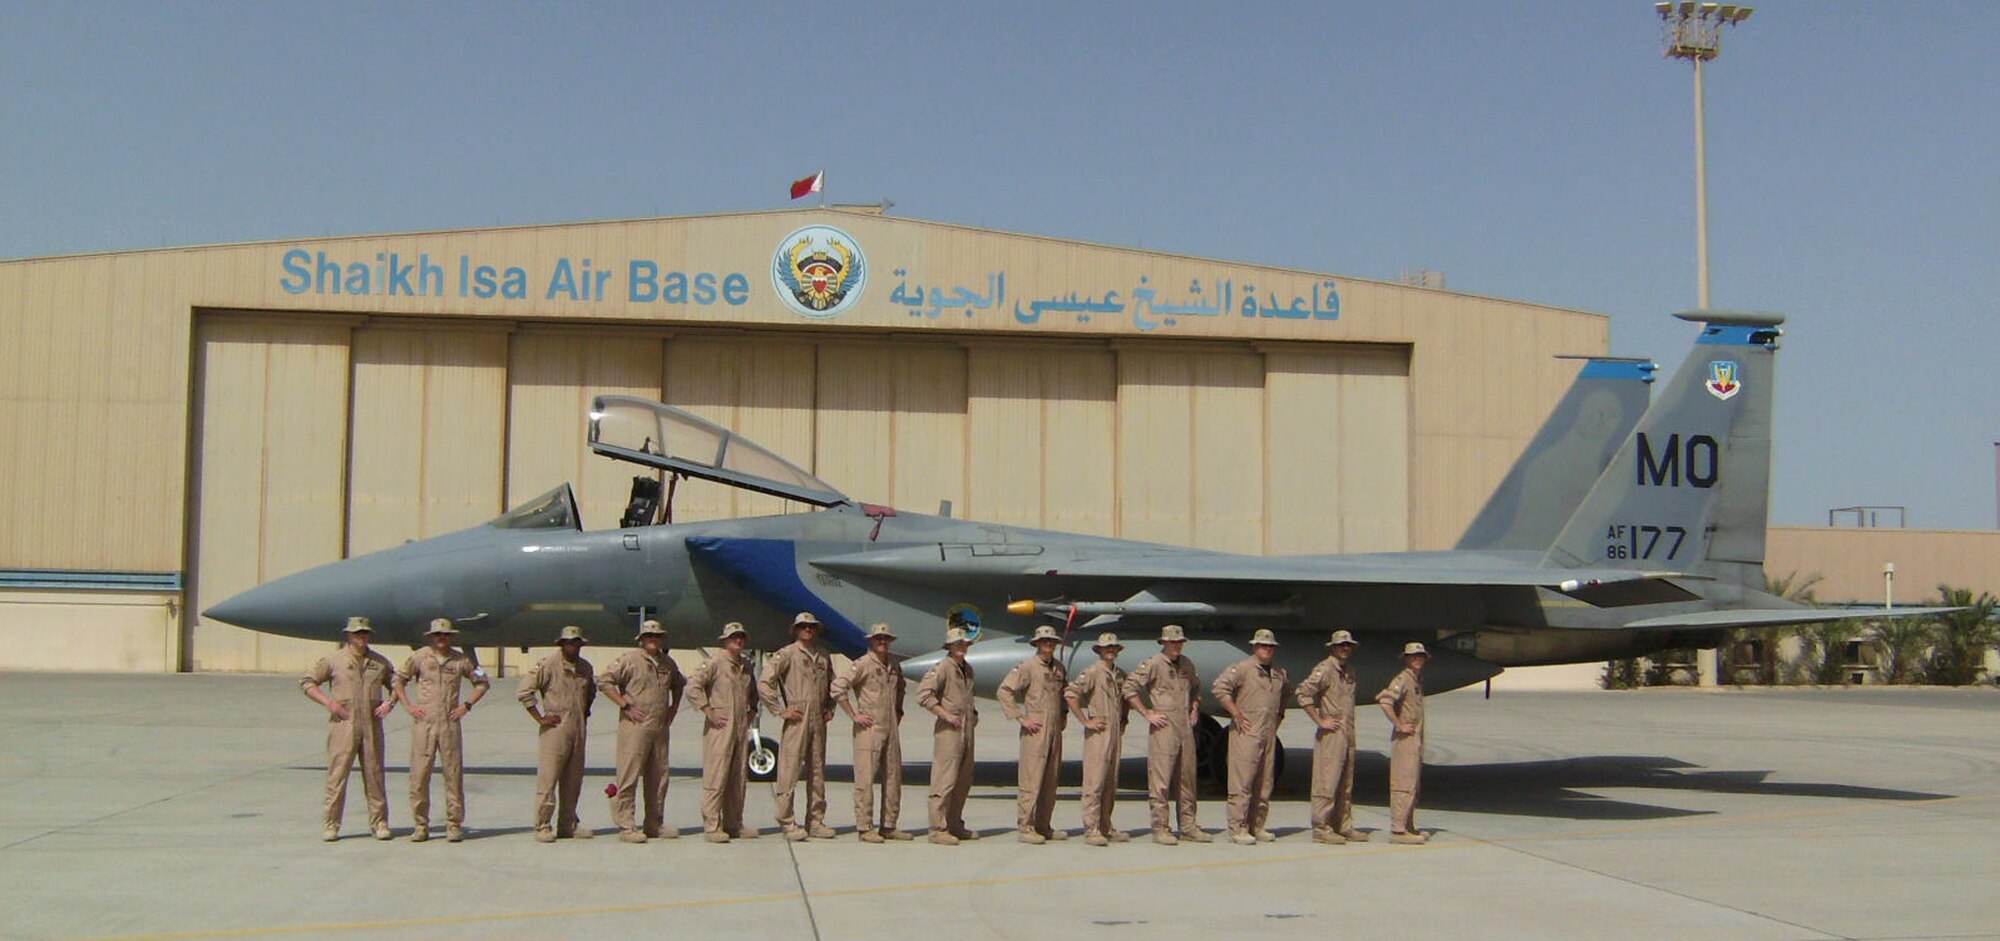 MOUNTAIN HOME AIR FORCE BASE, Idaho - Members of the 390th Fighter Squadron “Wild Boars” stand in front of one of the six F-15Cs on the flightline in Shaik Isa Air Base, Bahrain. The 390th FS participated in a multi-national exercise, FAZAA I, which included forces from the Gulf Coast Coalition states, which are Iran, Iraq, Kuwait, Saudi Arabia, Qatar, the United Arab Emirates and Bahrain, as well as Jordan and Italy May 9 to 18. (Courtesy photo)